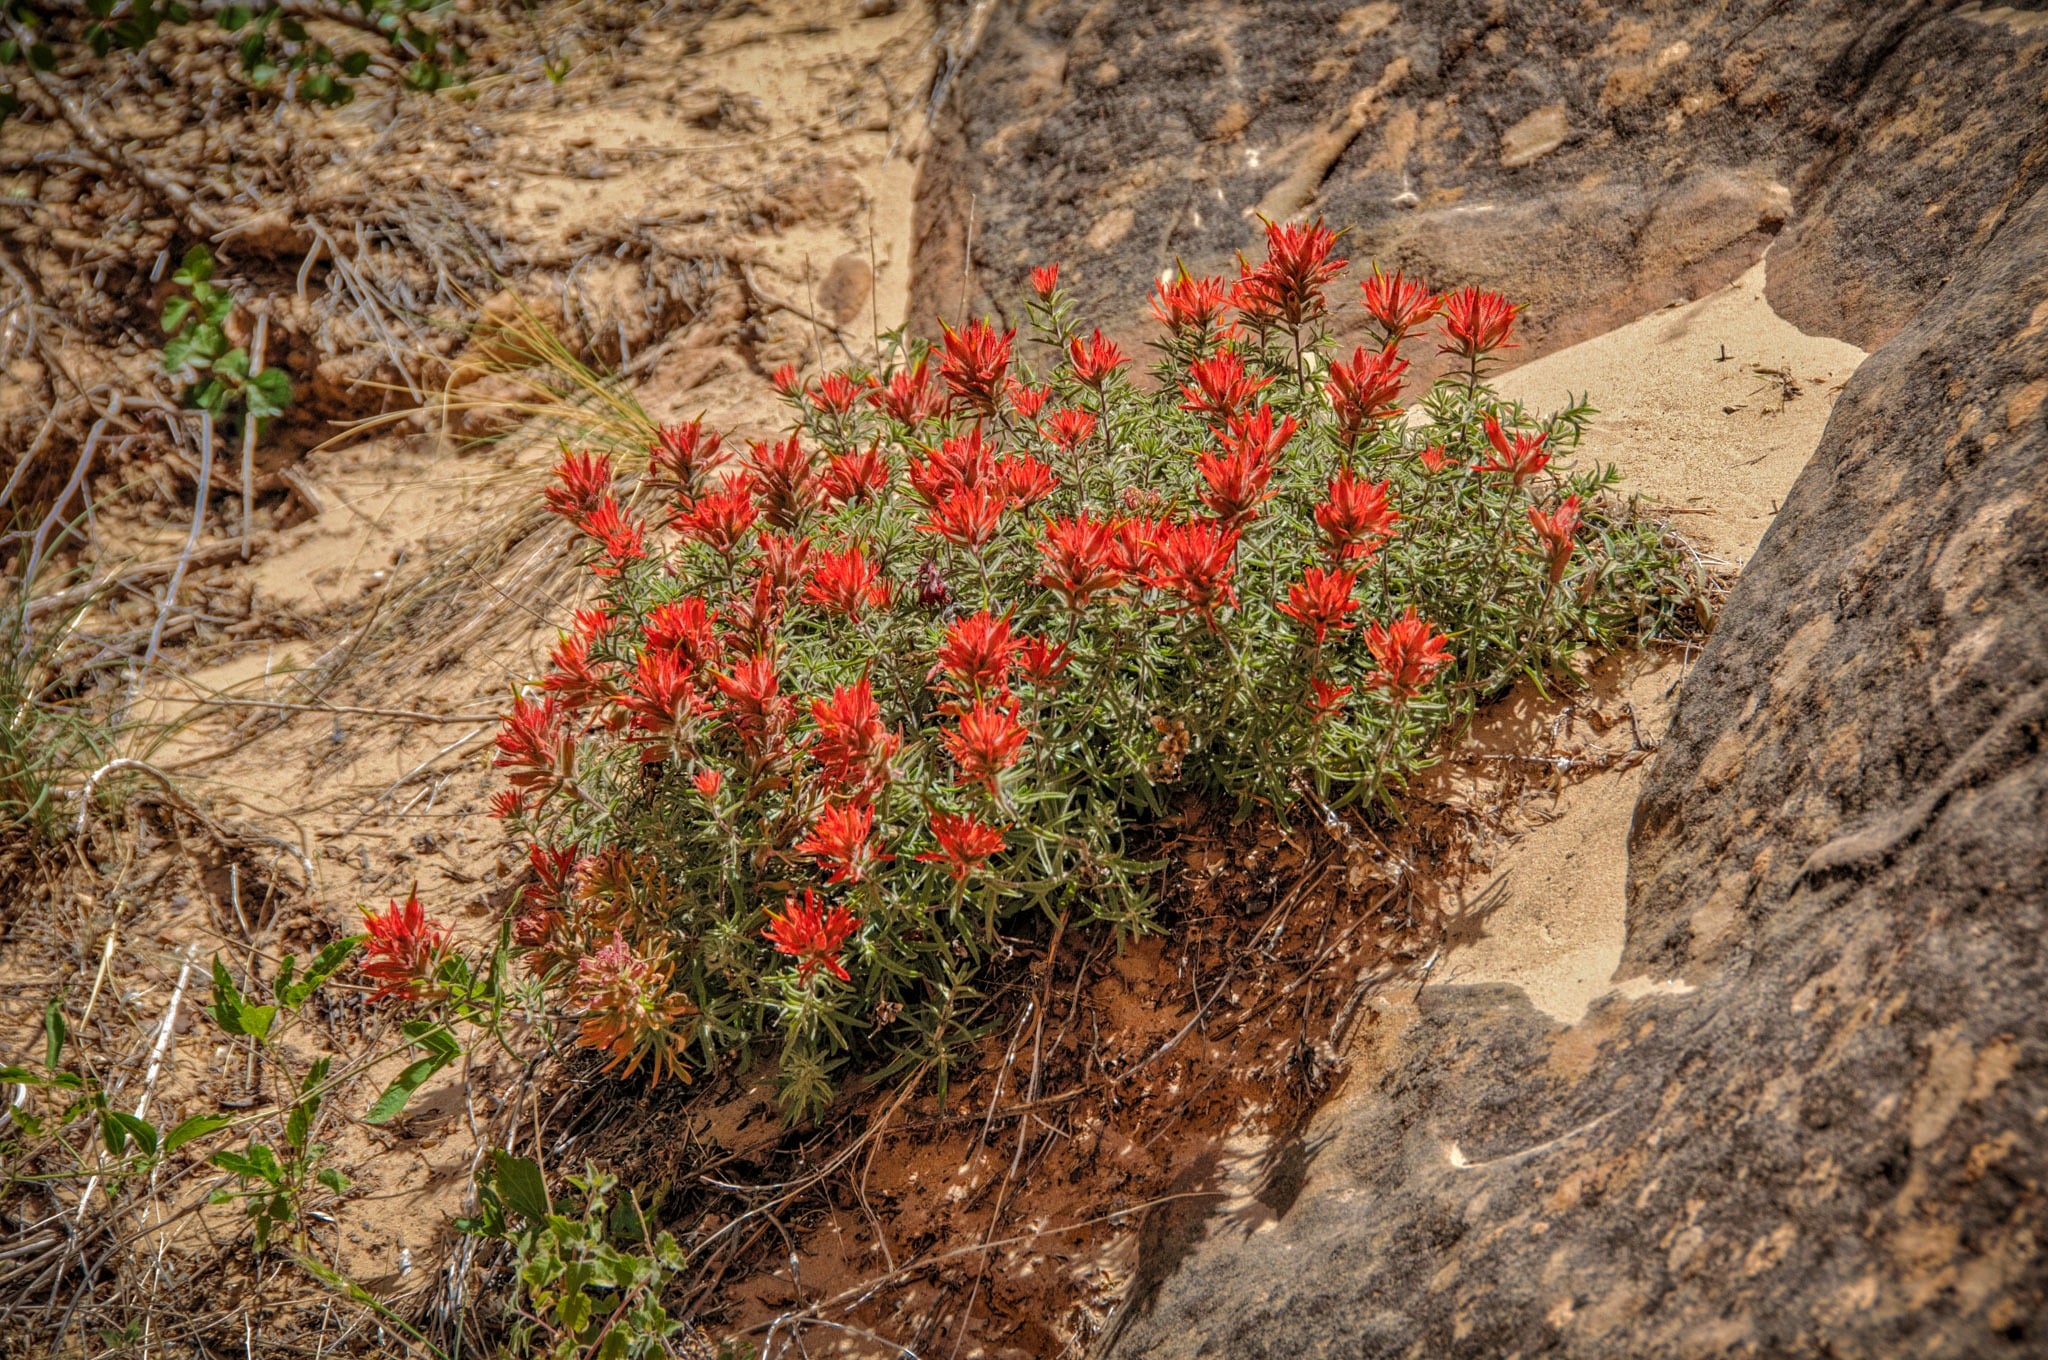 A clump of Red Desert Paintbrush grows along the Capitol Gorge Trail in Capitol Reef National Park, Utah.